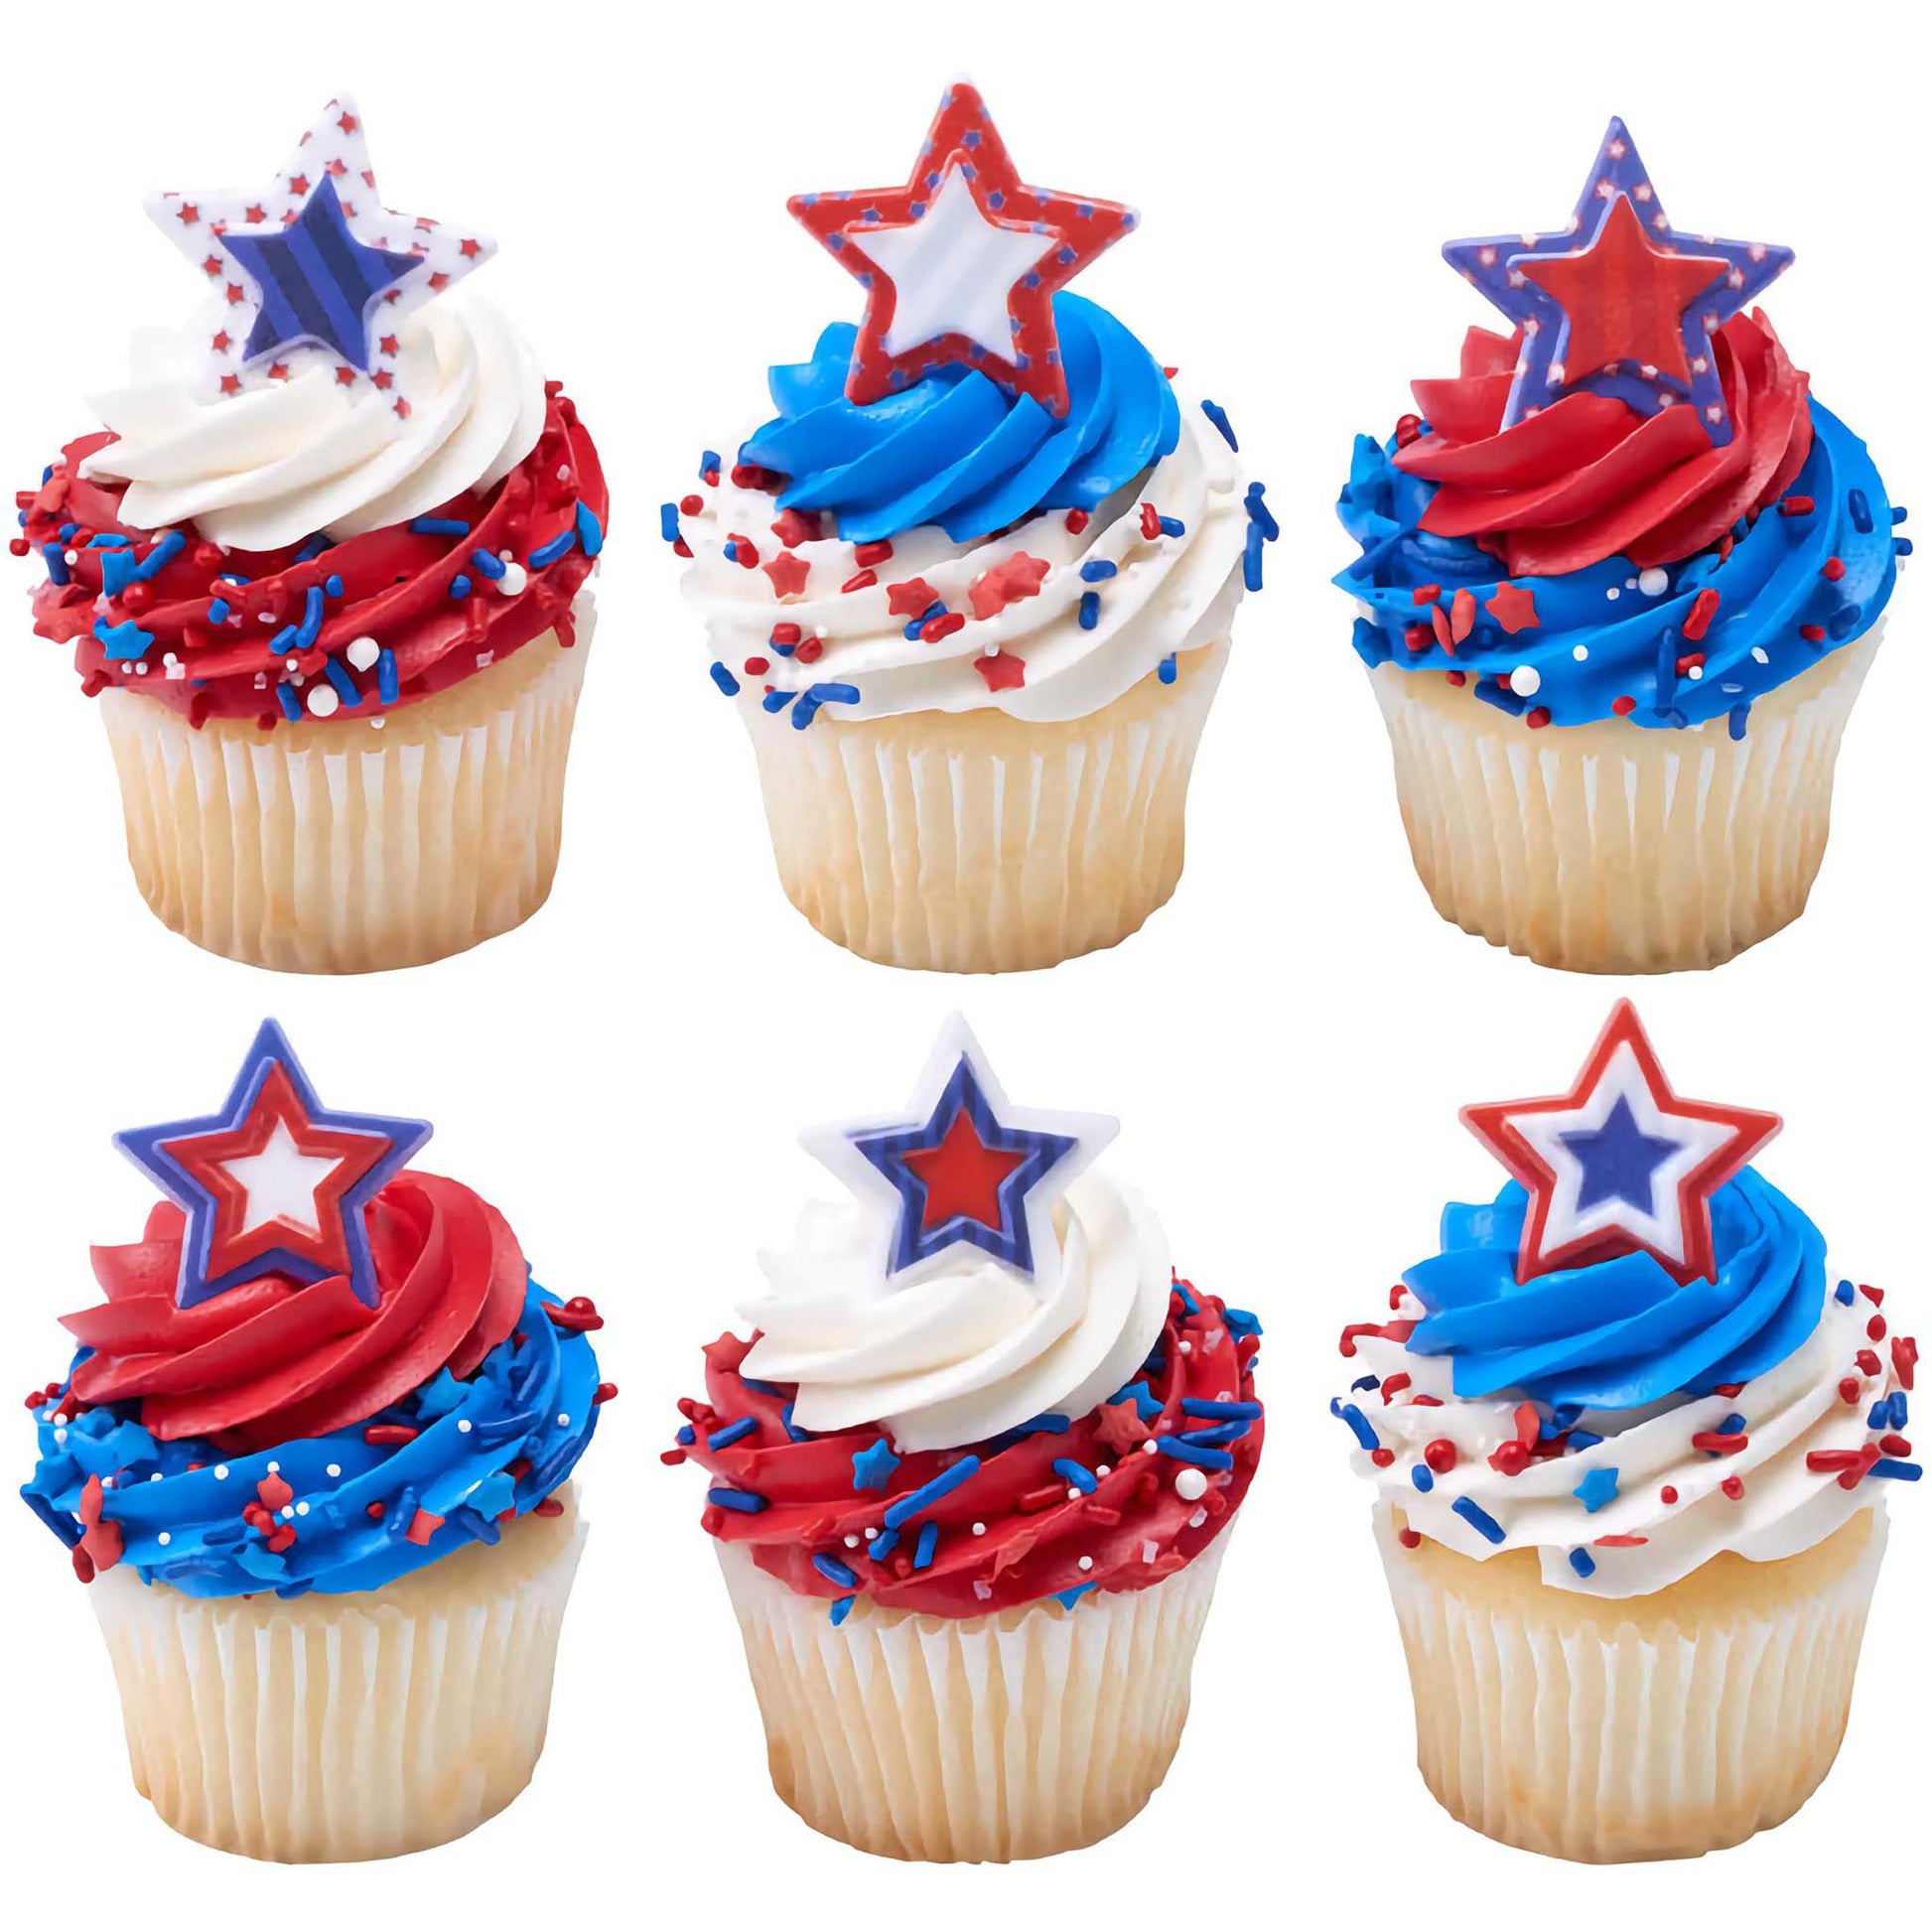 A set of cupcakes decorated with red, white, and blue frosting, topped with a patriotic sprinkle blend of stars and beads, each cupcake adorned with a star-shaped topper for a festive Fourth of July celebration.